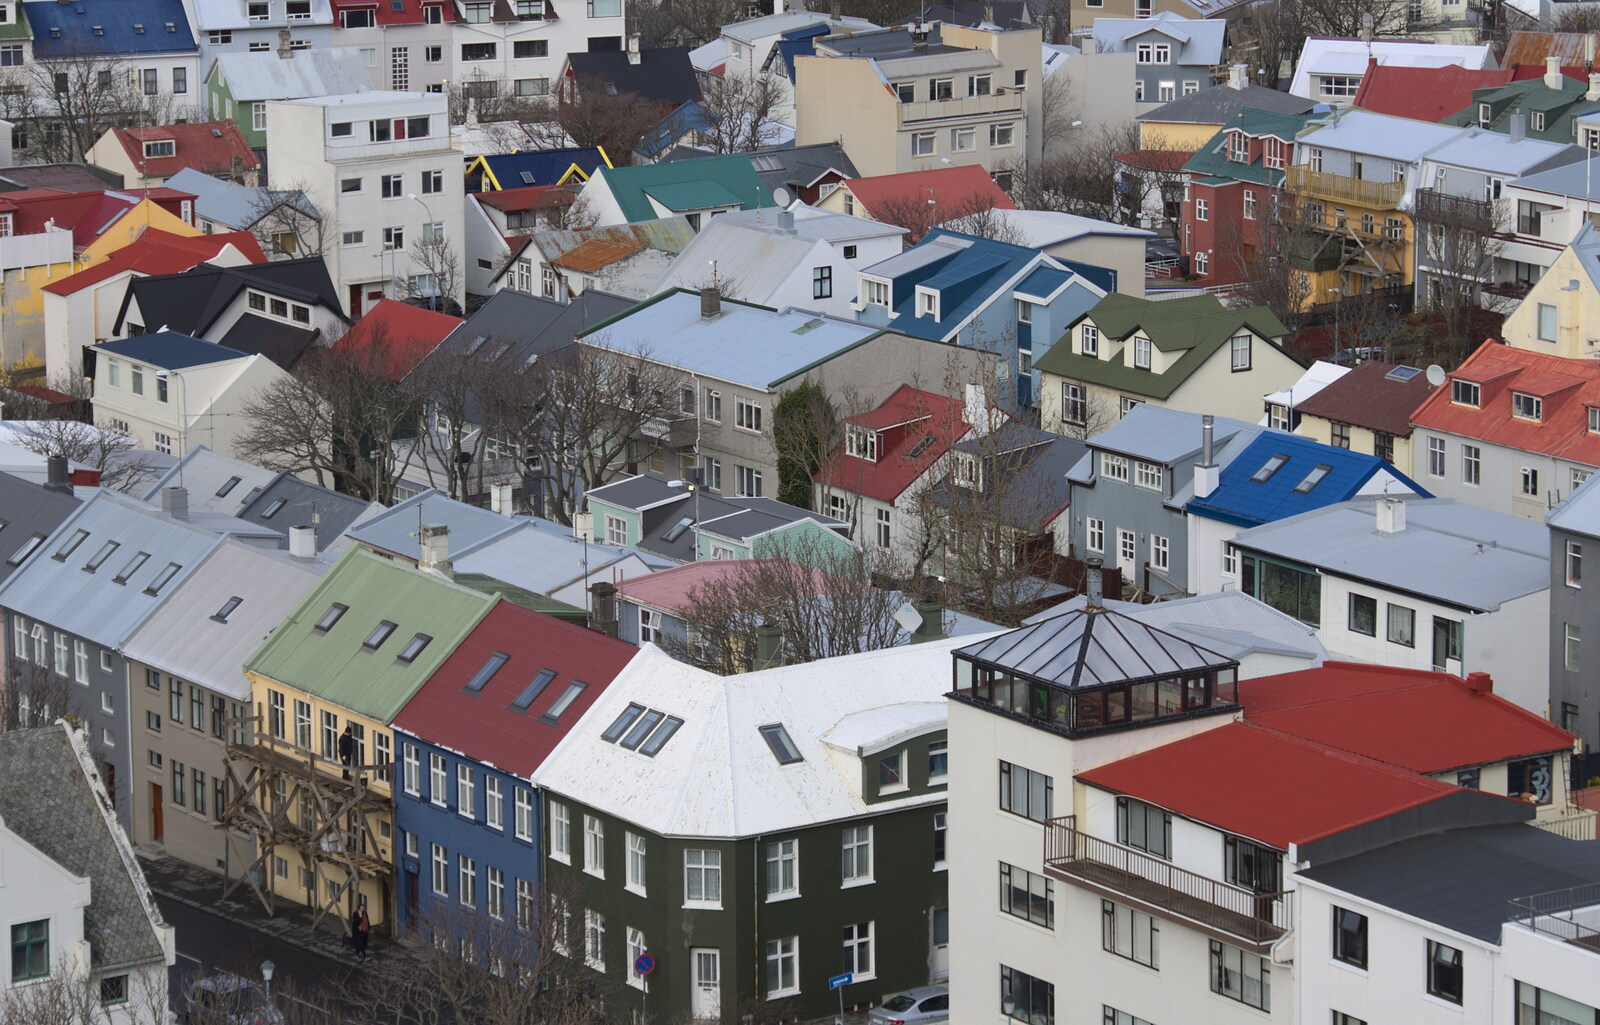 Packed colourful houses from Hallgrímskirkja Cathedral and Whale Watching, Reykjavik - 21st April 2017